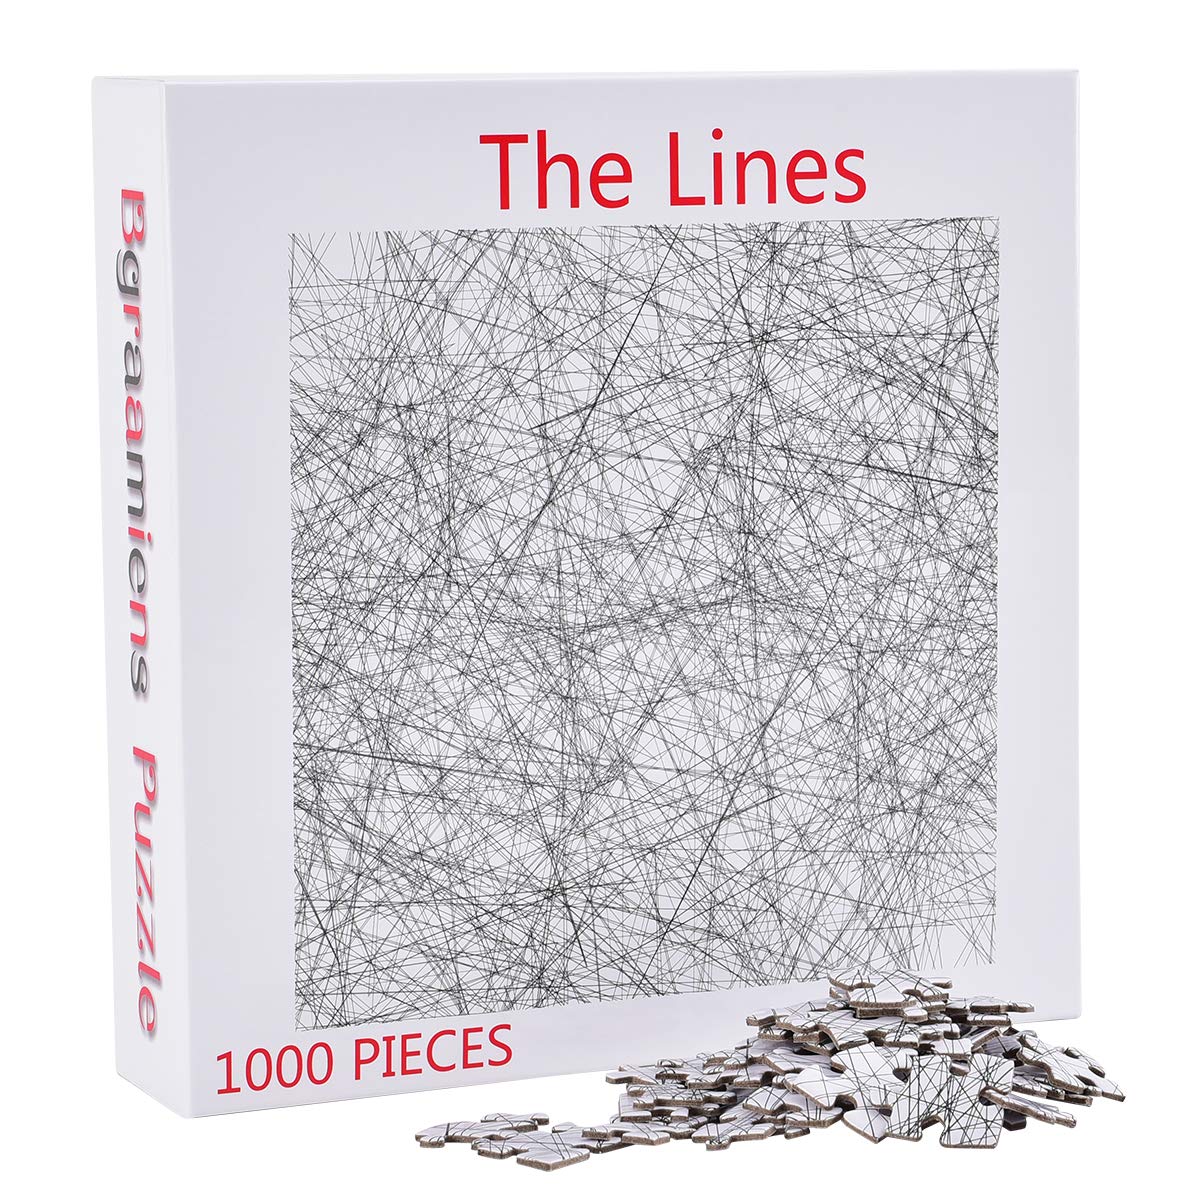 Packaging for a 1000 piece jigsaw puzzle called 'The Lines'